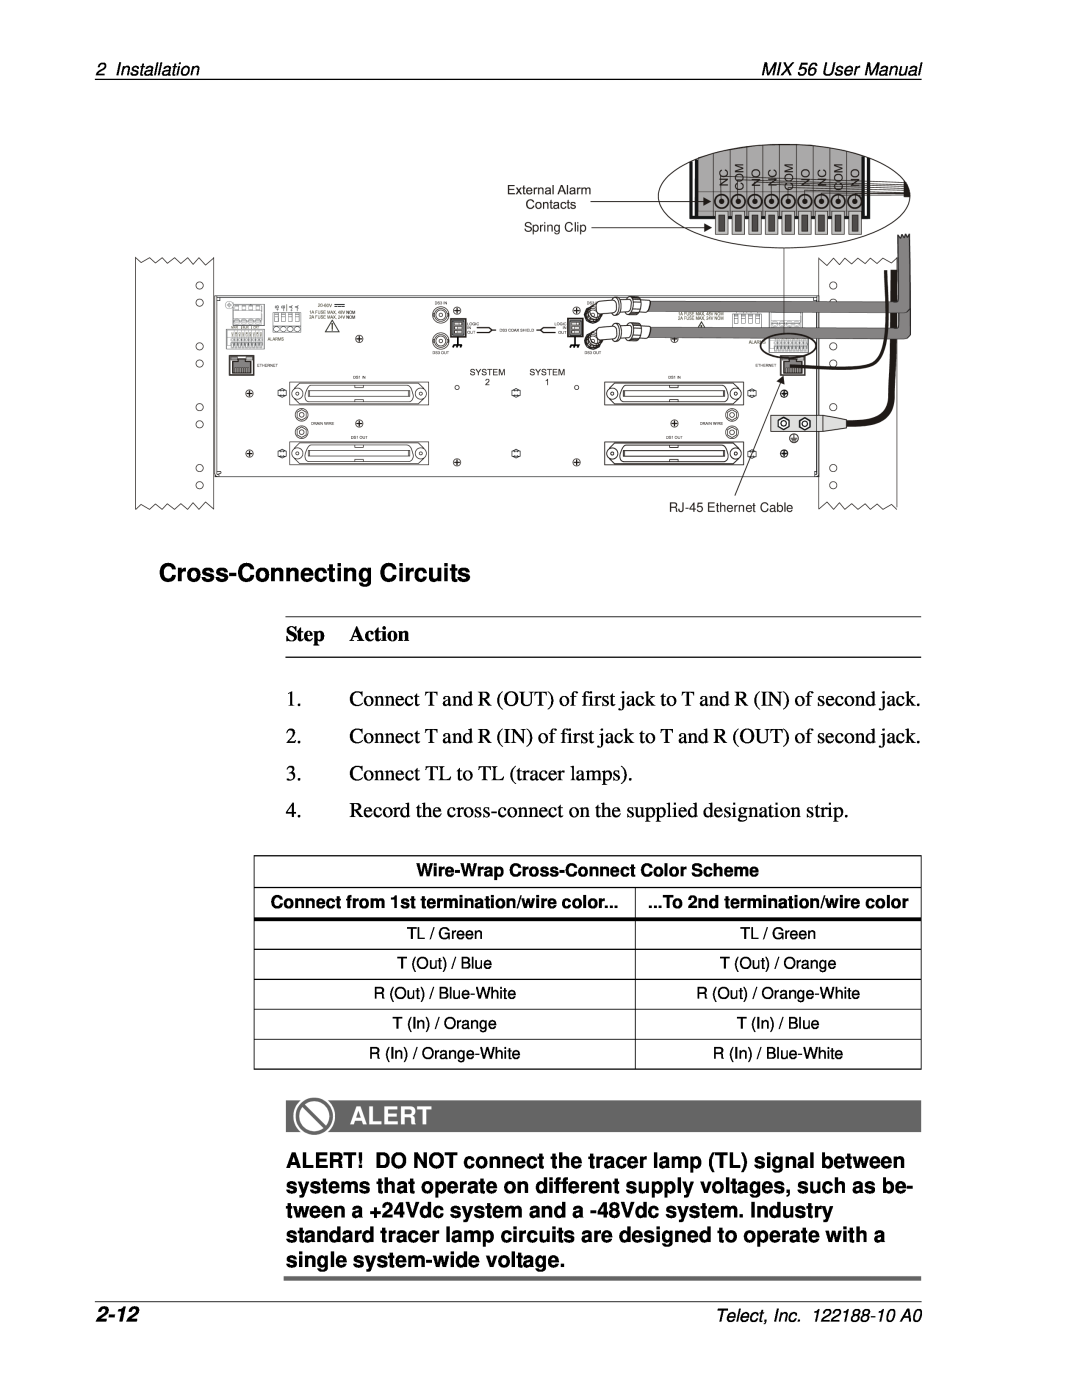 Telect Cross-Connecting Circuits, 2-12, Alert, Step Action, Installation, MIX 56 User Manual, Telect, Inc. 122188-10 A0 